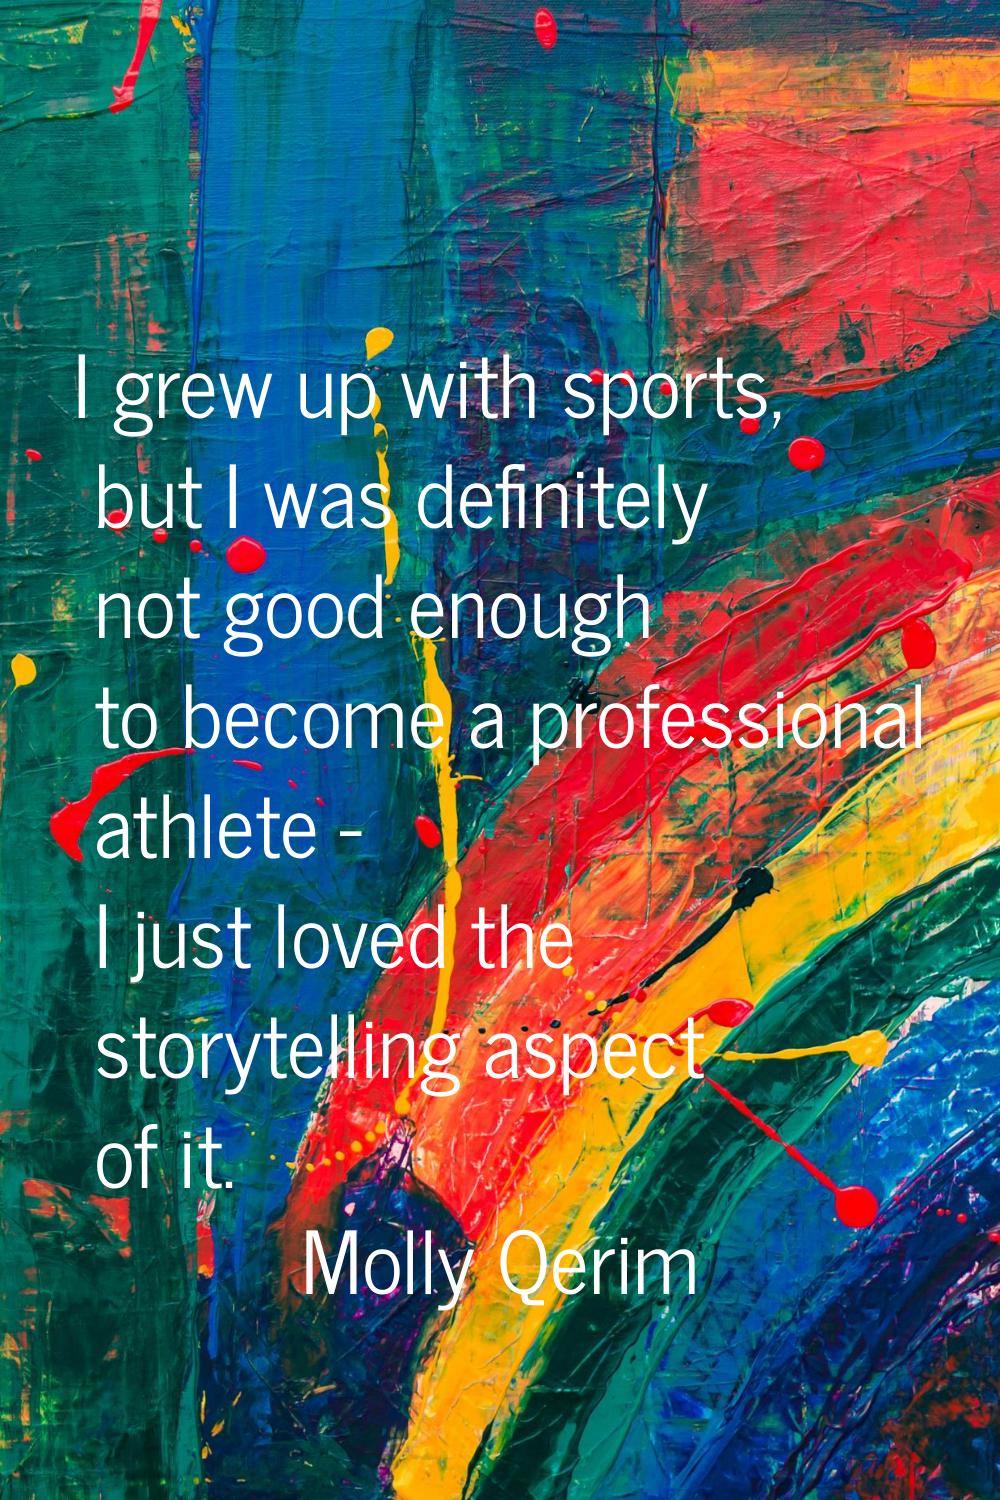 I grew up with sports, but I was definitely not good enough to become a professional athlete - I ju